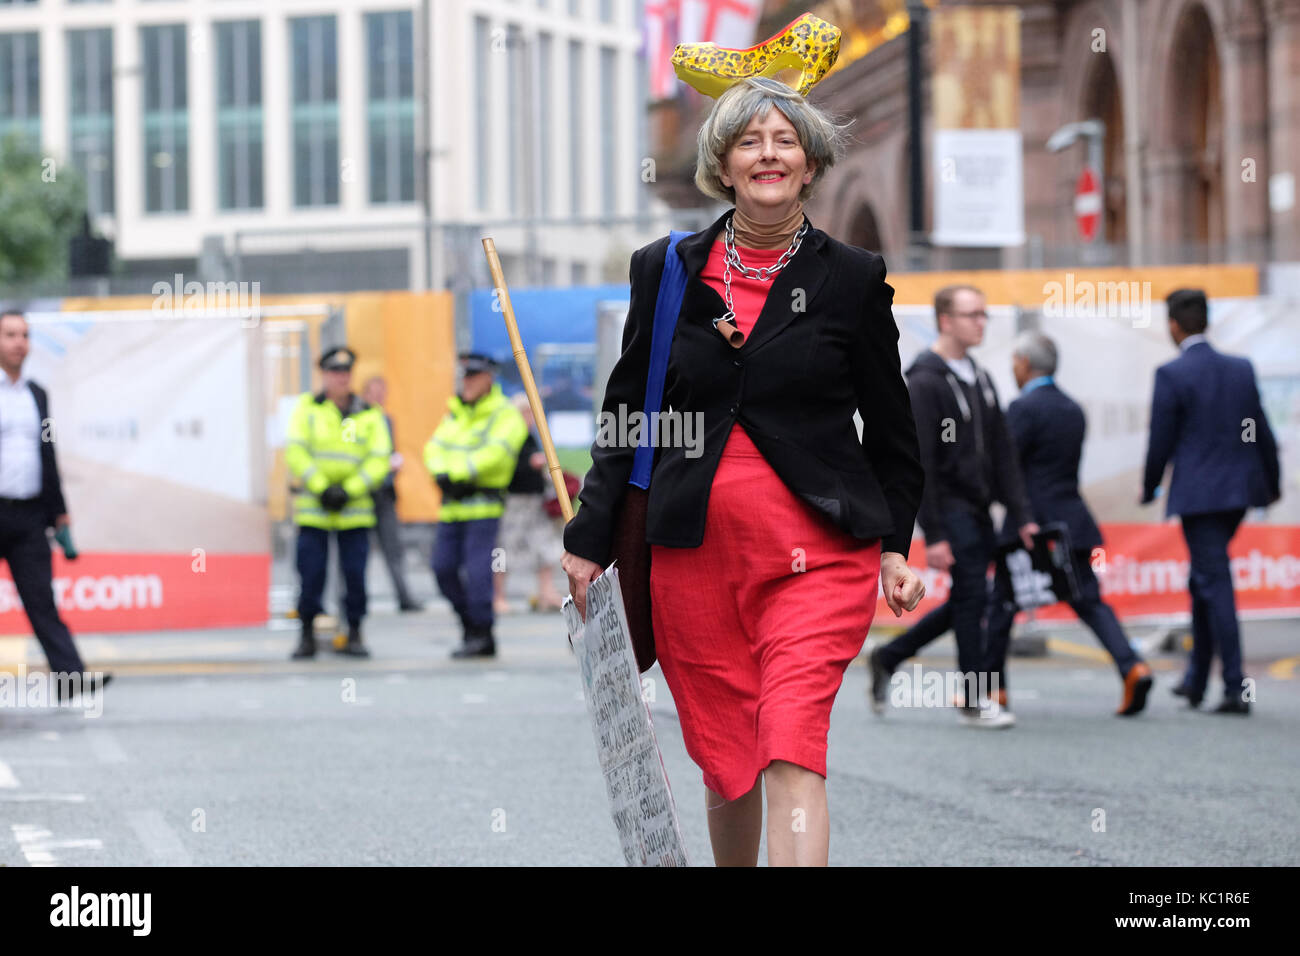 Manchester, UK. 1st October, 2017. Conservative Party Conference, Manchester UK, Sunday 1st October 2017 - A protester dressed to look like Theresa May walks past the Midland Hotel in the city centre on the opening day of the Conservative Party Conference. Credit: Steven May/Alamy Live News Stock Photo